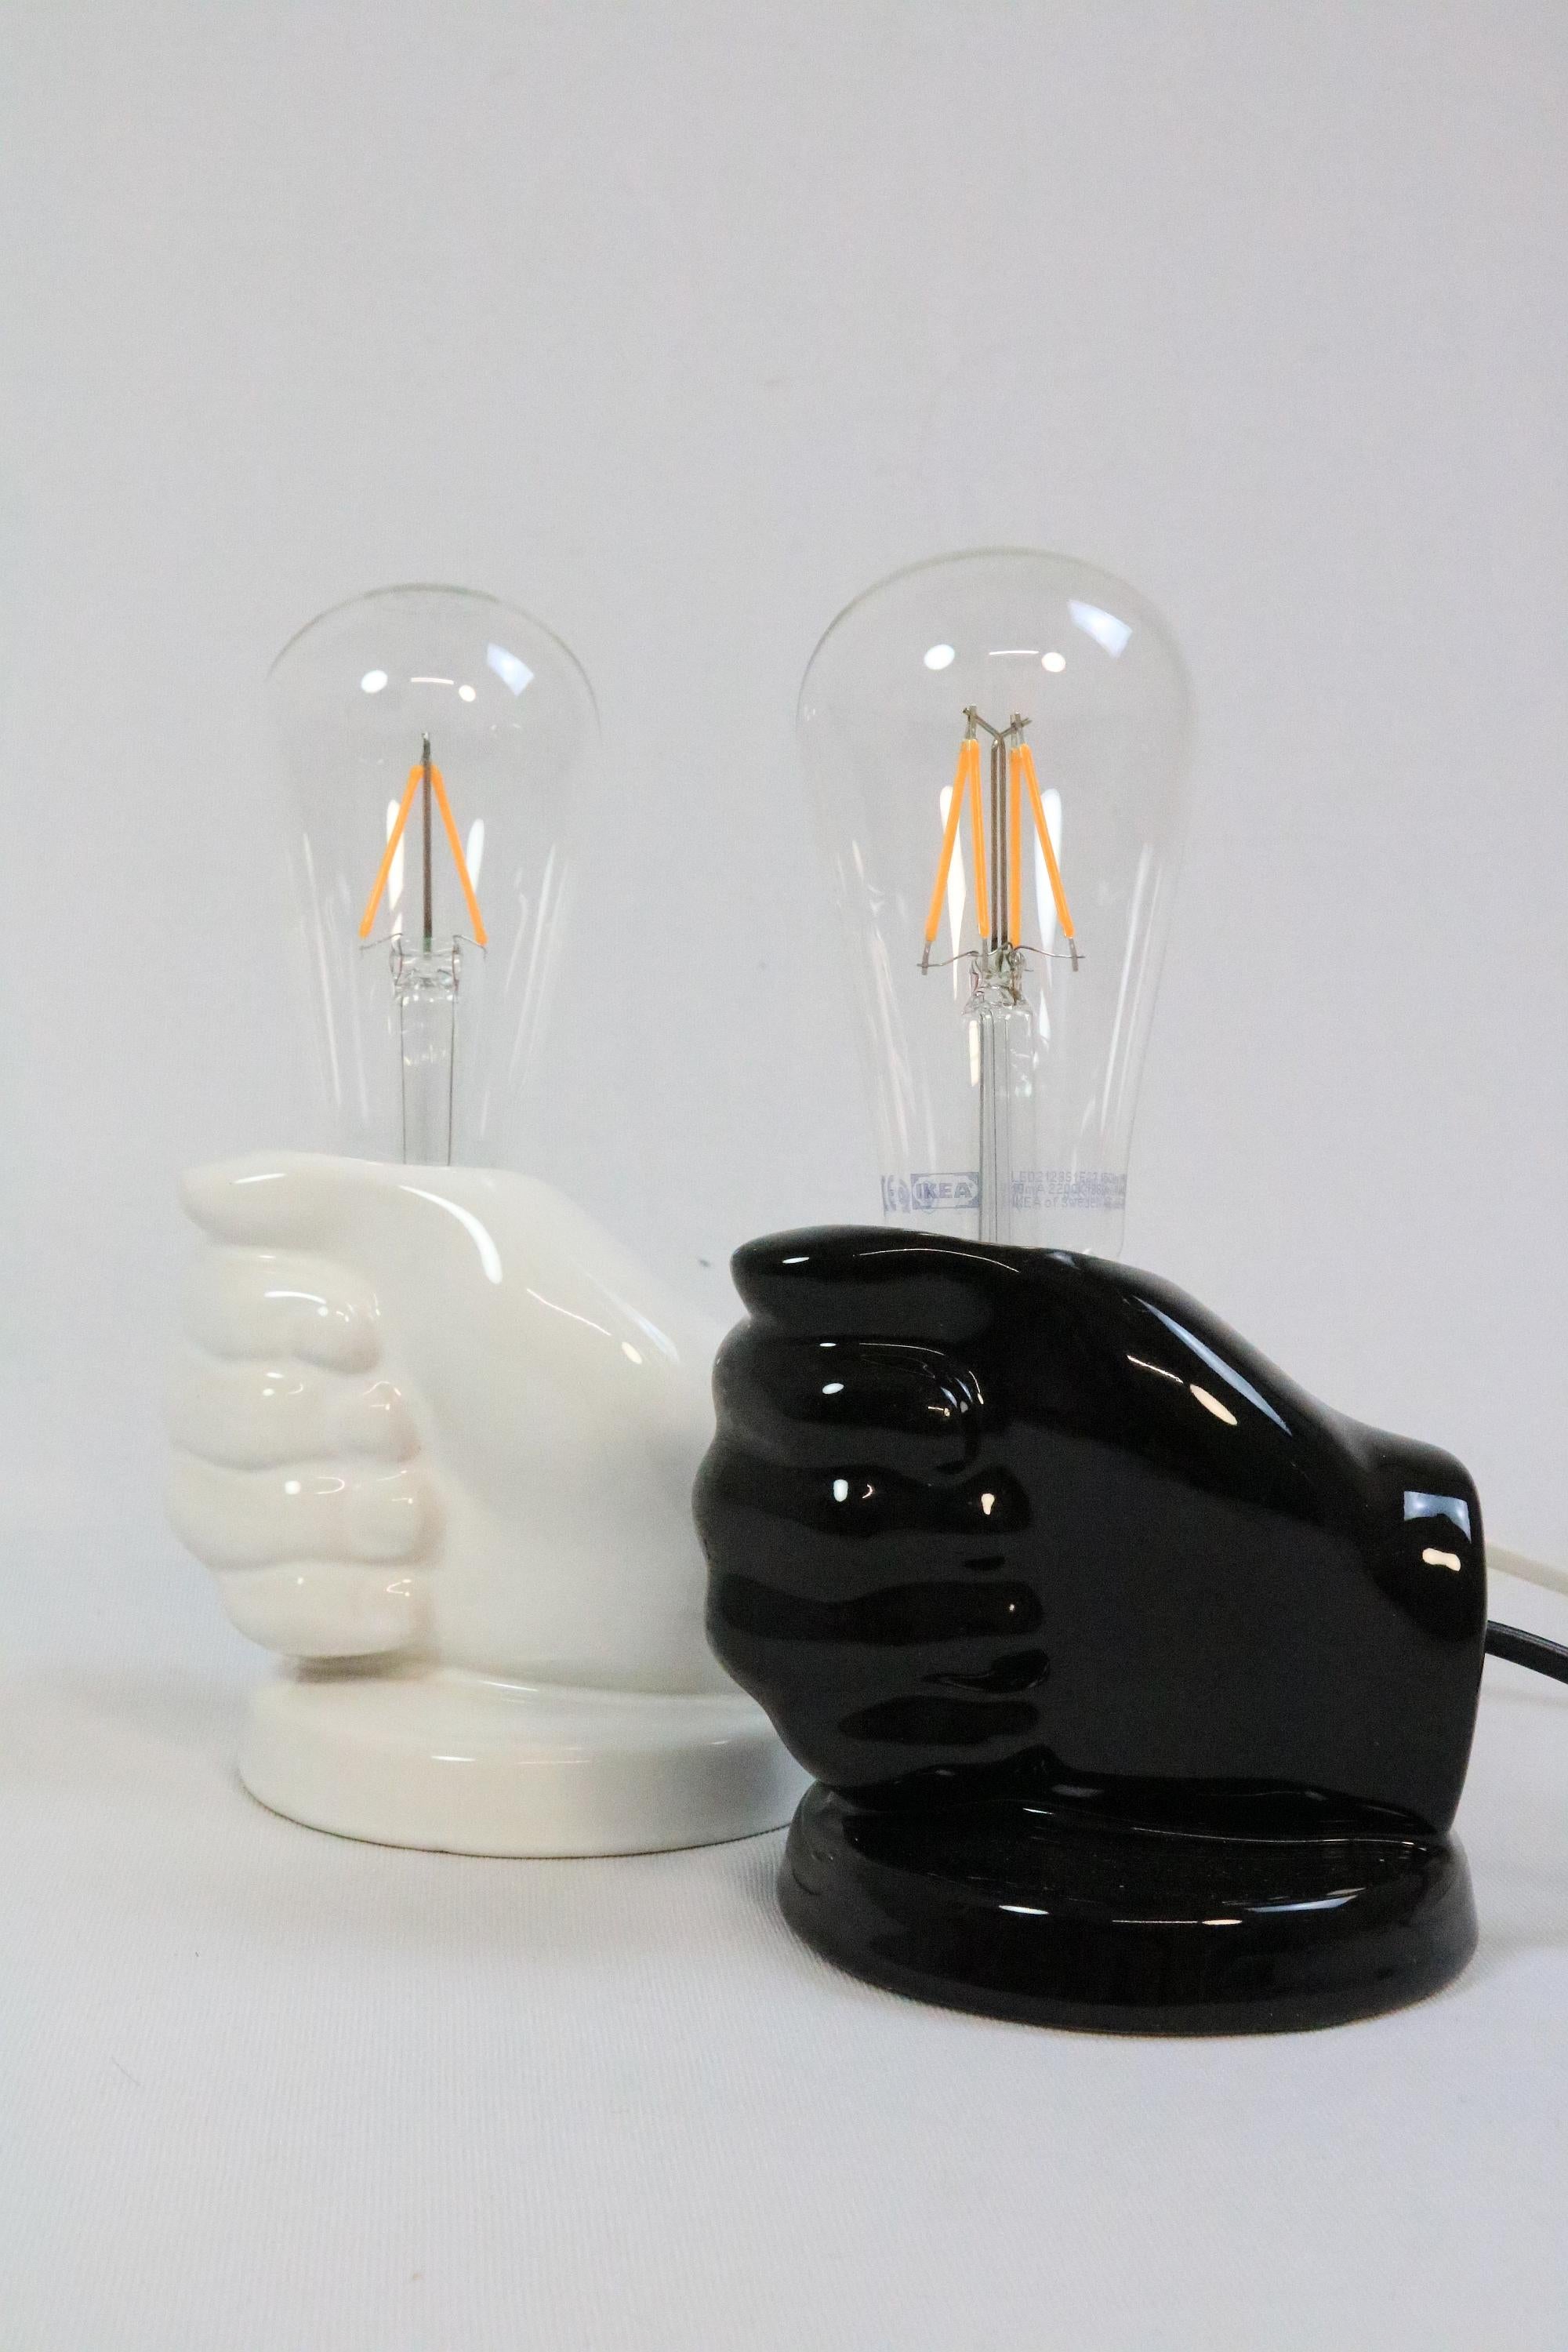 2 x Small Pottery Table Lamp, Hand, Black / White, 1980s, by Aro Germany In Good Condition For Sale In Berlin, BE